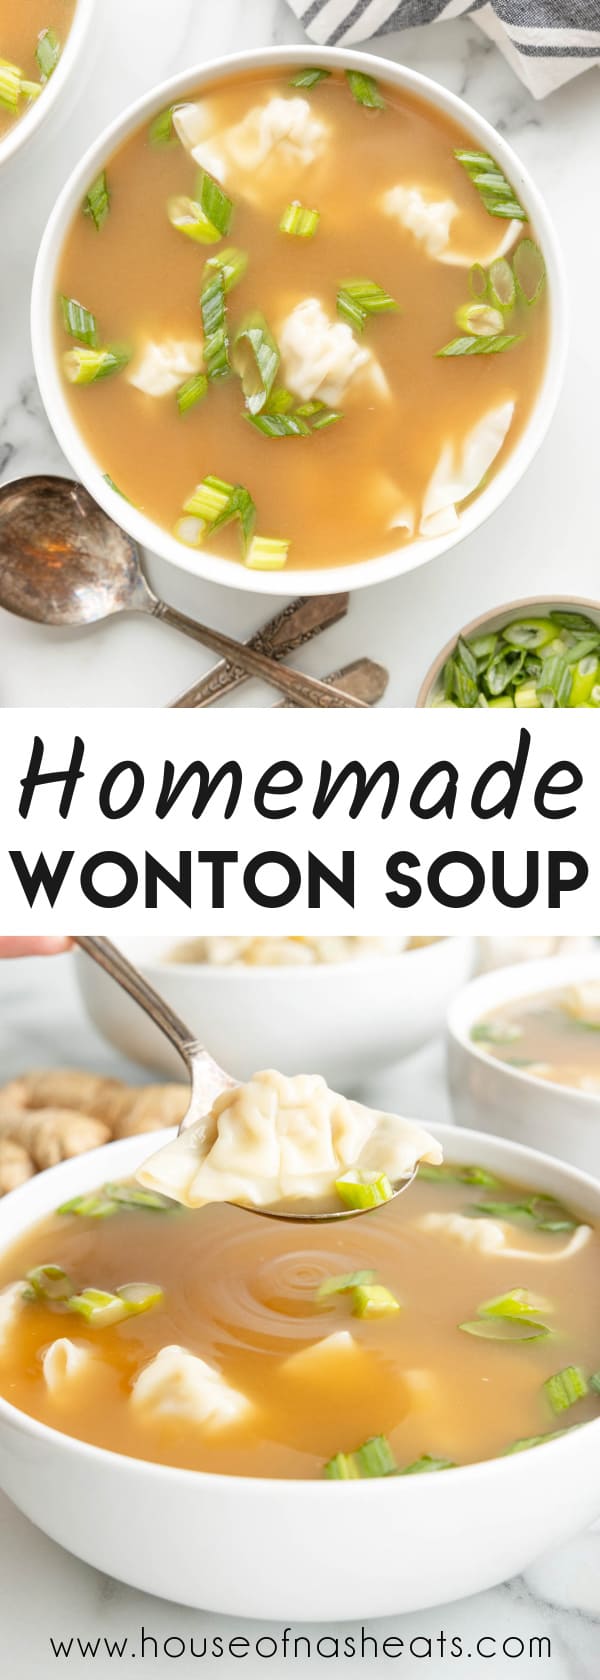 A collage of images of wonton soup with text overlay.